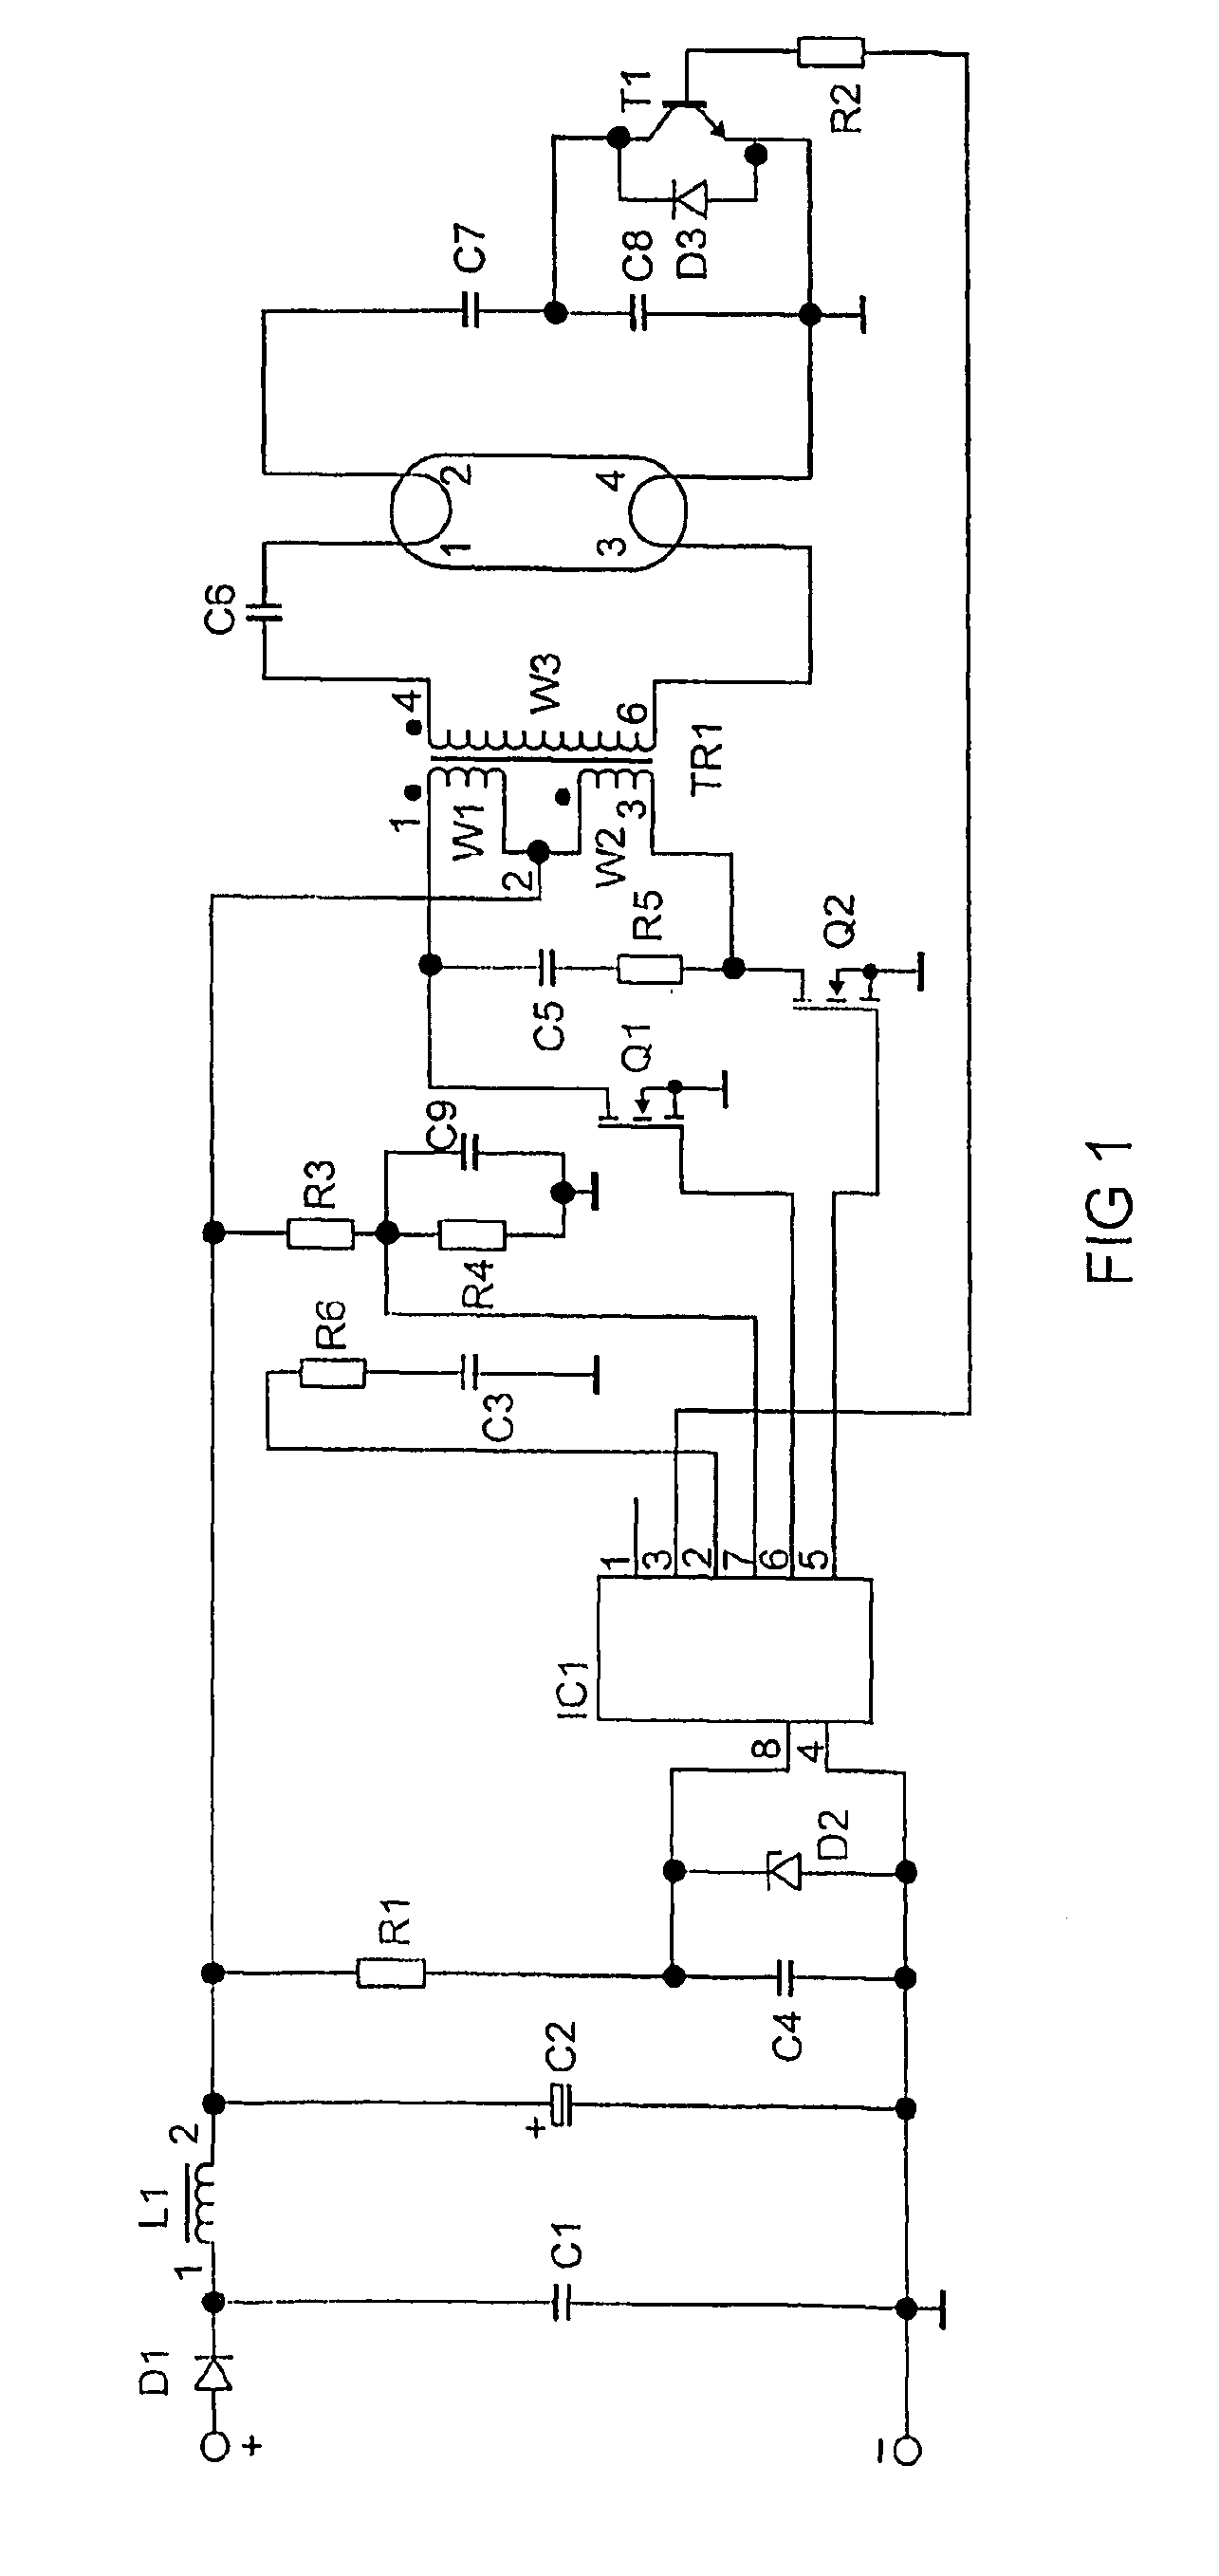 Electronic Ballast For A Low-Pressure Discharge Lamp With A Micro-Controller